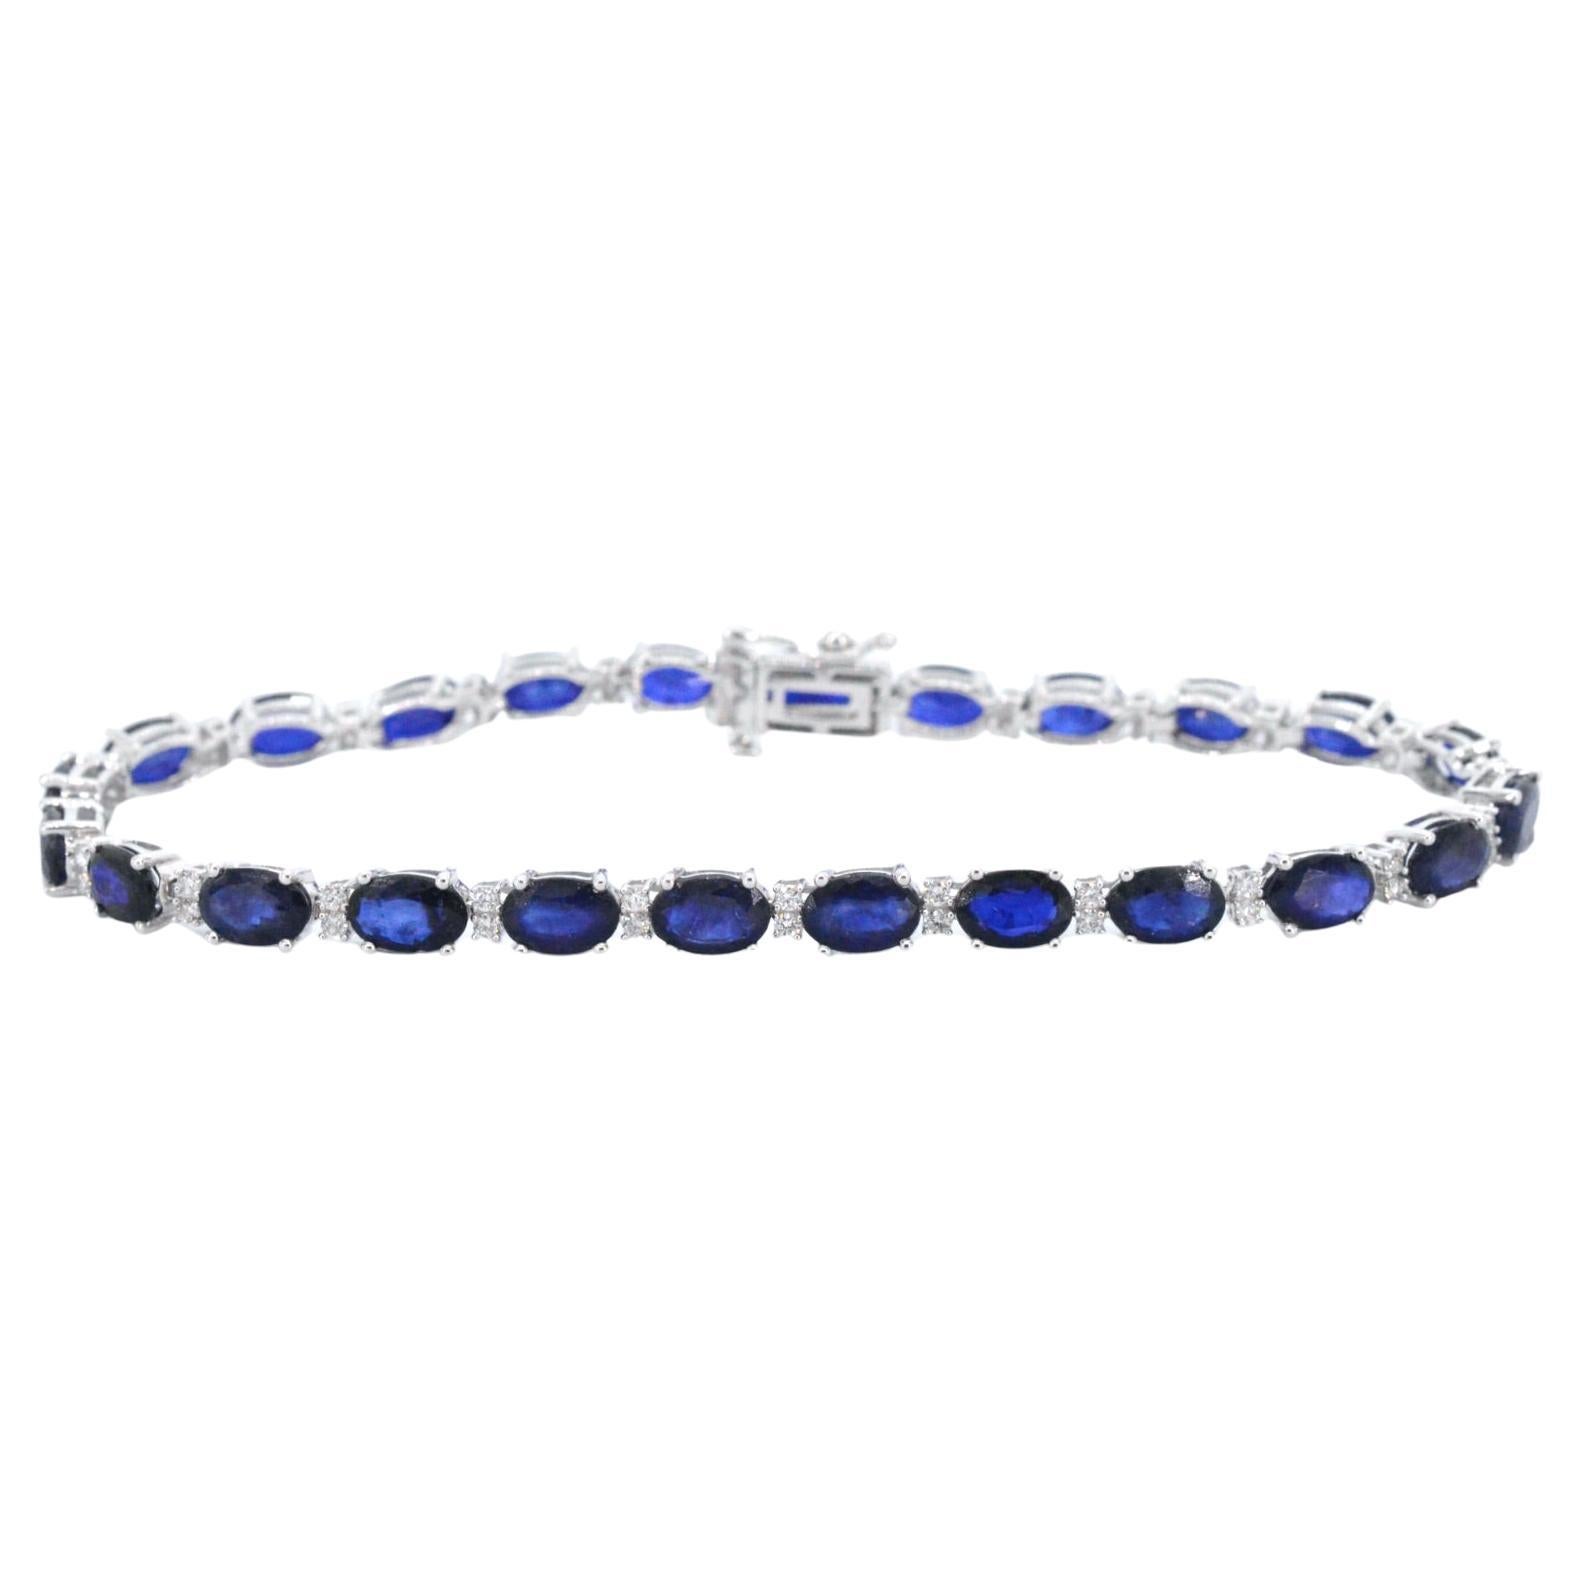 White gold tennis bracelet with diamonds and sapphire